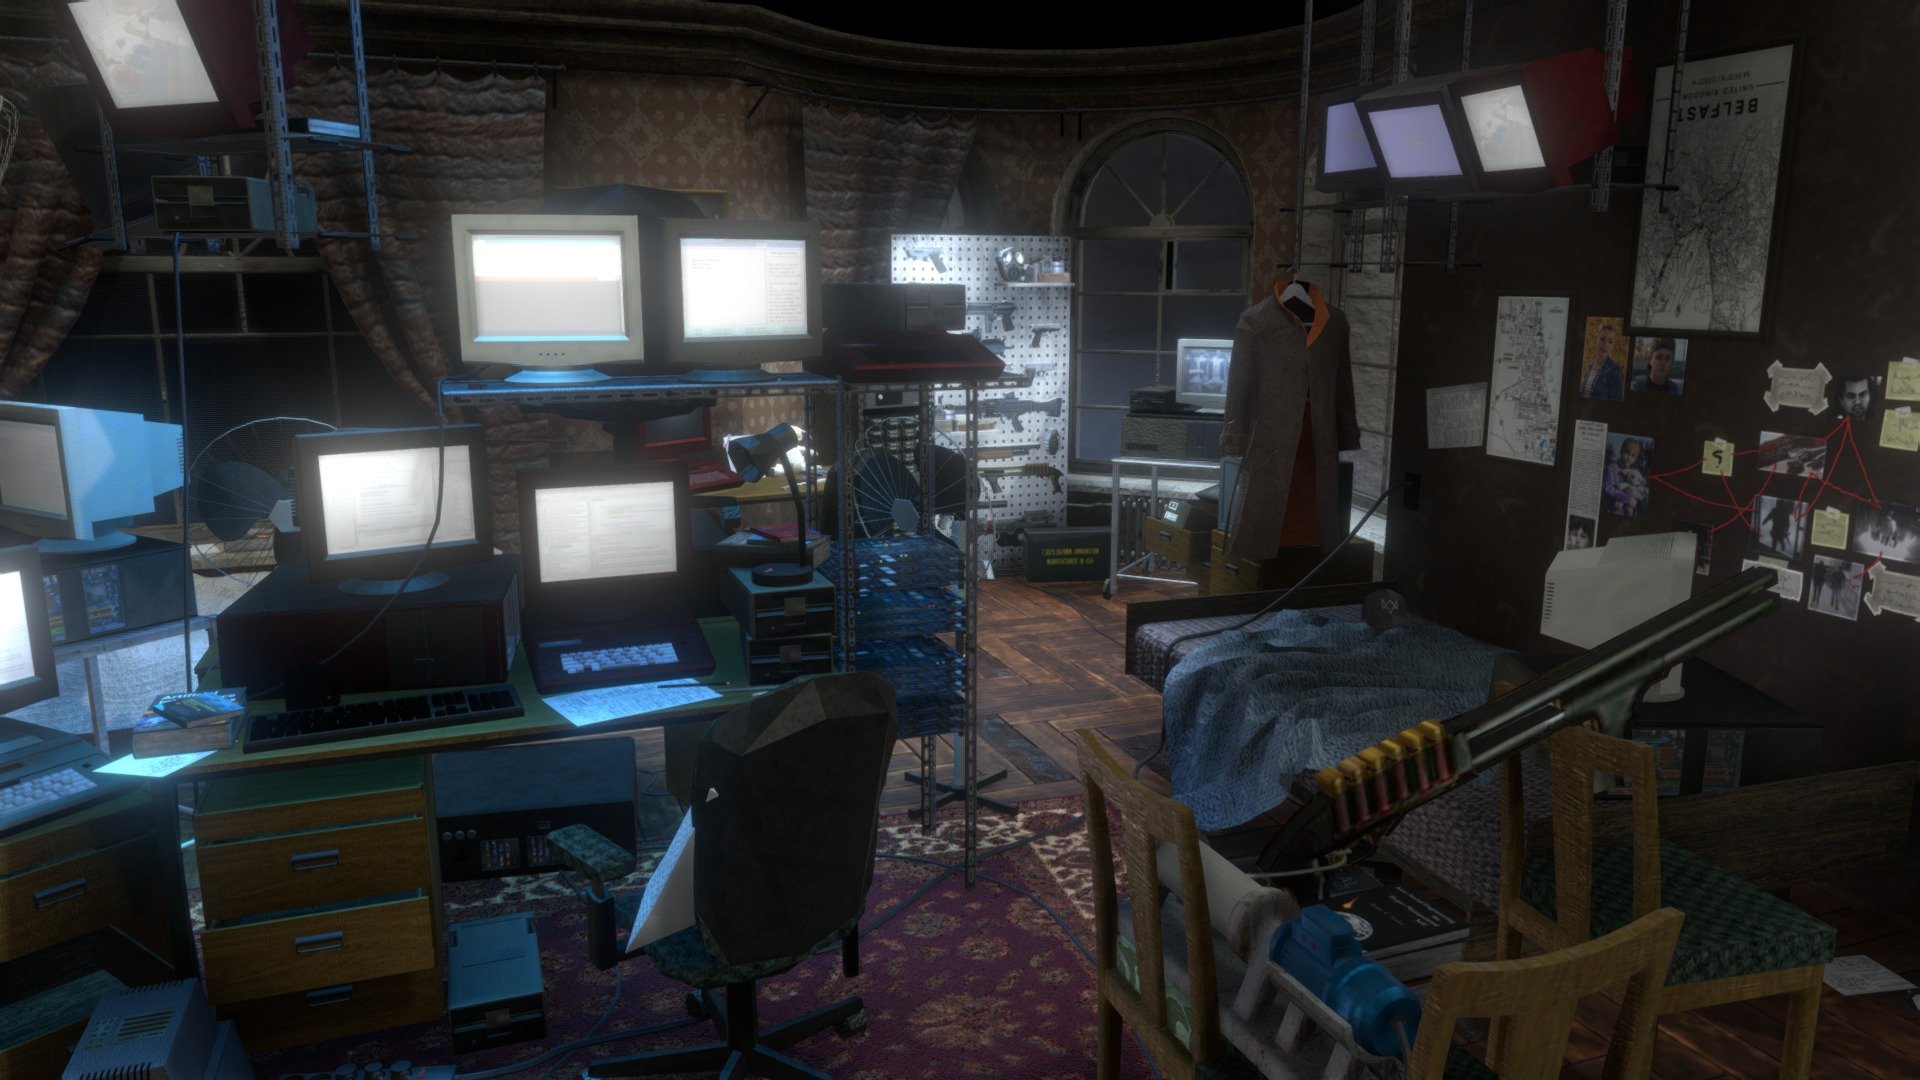 This interior is based on the character Aiden pearce from Watch_Dogs (2014). I imagined his hideout to be packed with electrical equipment, booby-trapped to prevent intruders, and look as though it belongs to an obbsessive and paranoid madman who also has no time to tidy up. 

Enviromental storytelling features:


Framed photo of Lena Pearce (deceased neice) who fell victim to Aiden's actions. 
Lena's teddy and bracelet she might have had.
Investigation wall.
Aiden's coat hung up on a hanger.
Map of Belfast (where Aiden grew up).
Map of Chicago (where game is set).
Makeshift booby-trap where a shotgun is set to be triggered to shoot if an intruder comes in.
ctOS surveillance footage of nearby areas.
Framed picture of the Cloud Gate (iconic Chicago sculpture).
Books on big cons, social engineering, psychology and intimidation tactics.
A safe to keep all his stolen, undeclared money.
Server tower to keep confidential files on.
 - Aiden Pearce's Hideout - 3D model by Michaela Blanchfield (@michaelablanchfield) 3d model